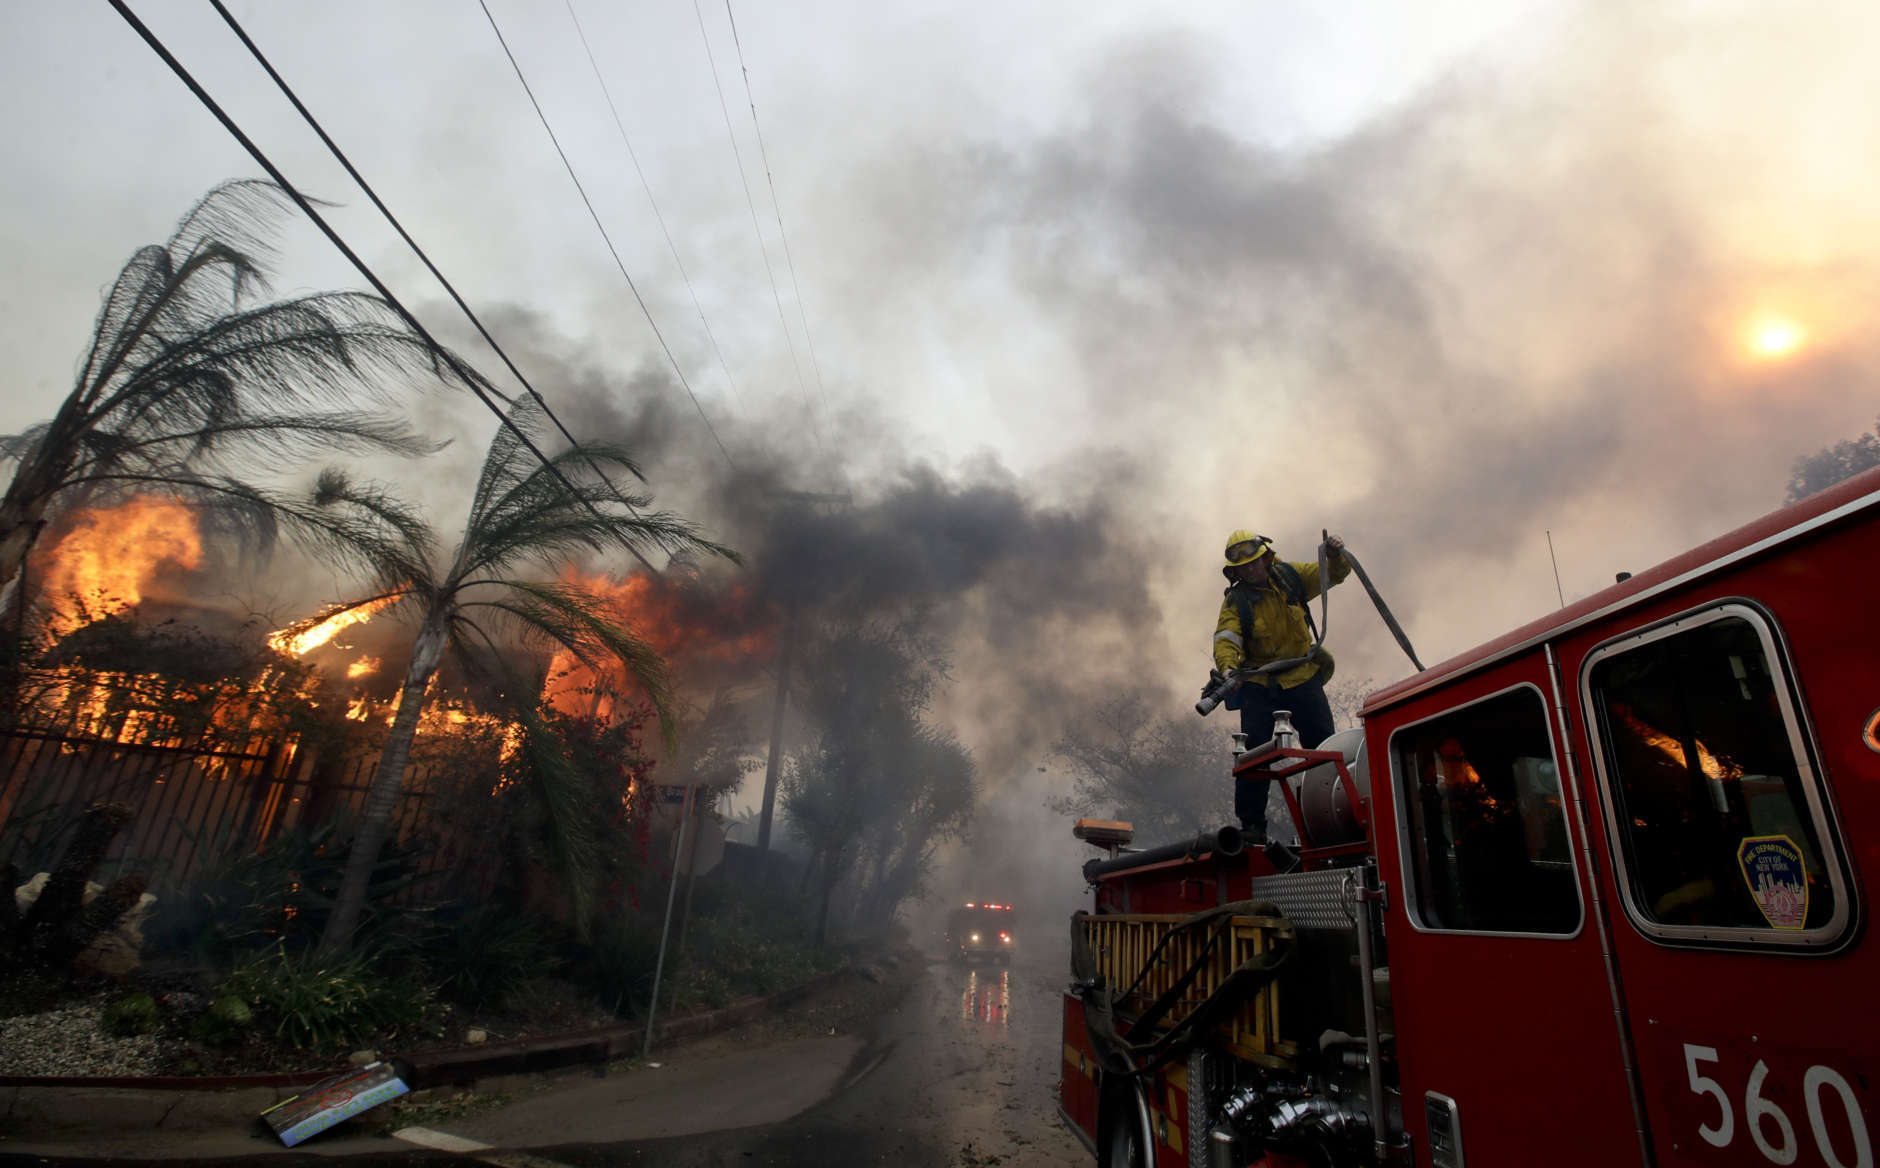 A Los Angeles County firefighter prepares to battle a hot spot on the "Creek Fire" in the Lake View Terrace area of Los Angeles, Tuesday, Dec. 5, 2017. (AP Photo/Chris Carlson)